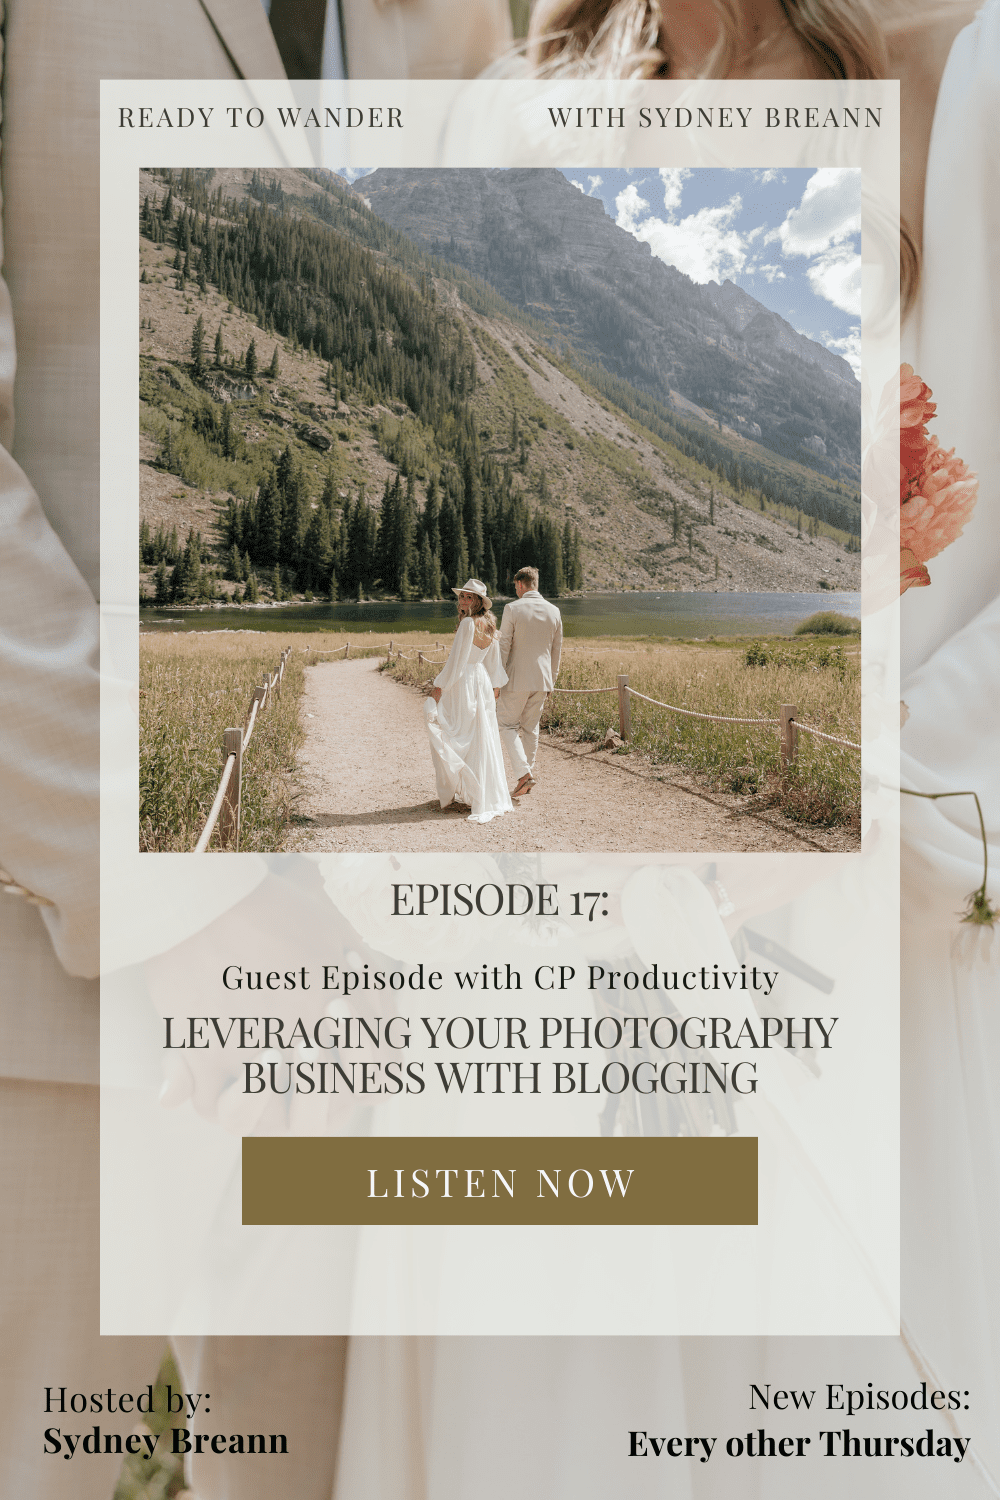 Blogging to scale your photography business with Sydney Breann and CP Productivity